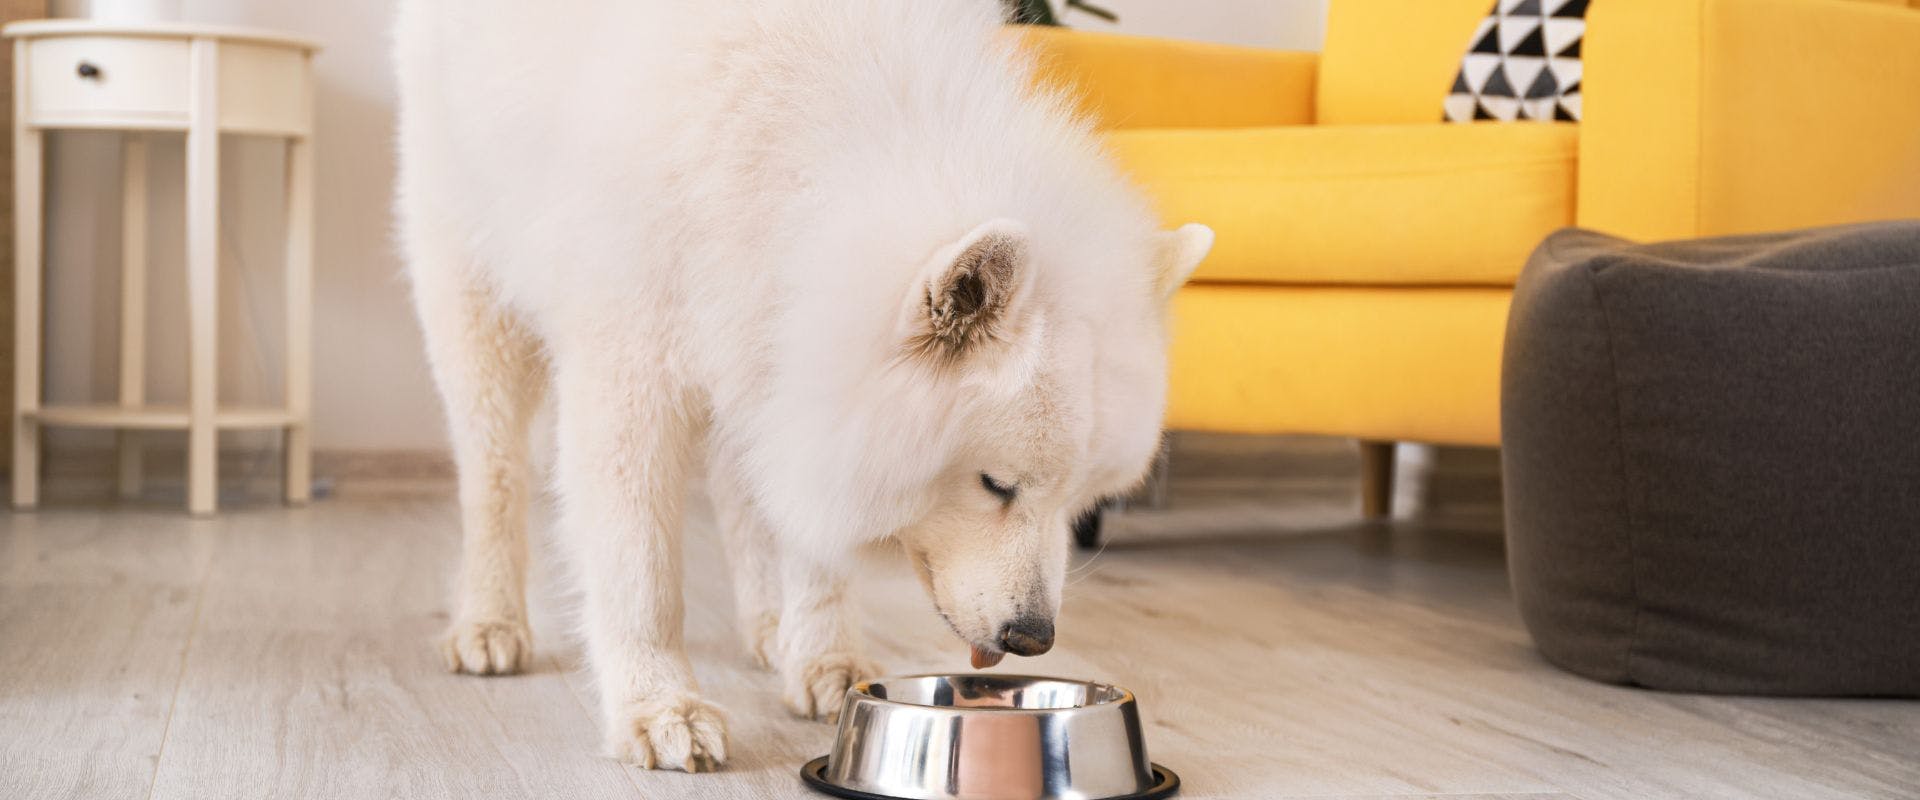 White fluffy dog eating from a metal bowl